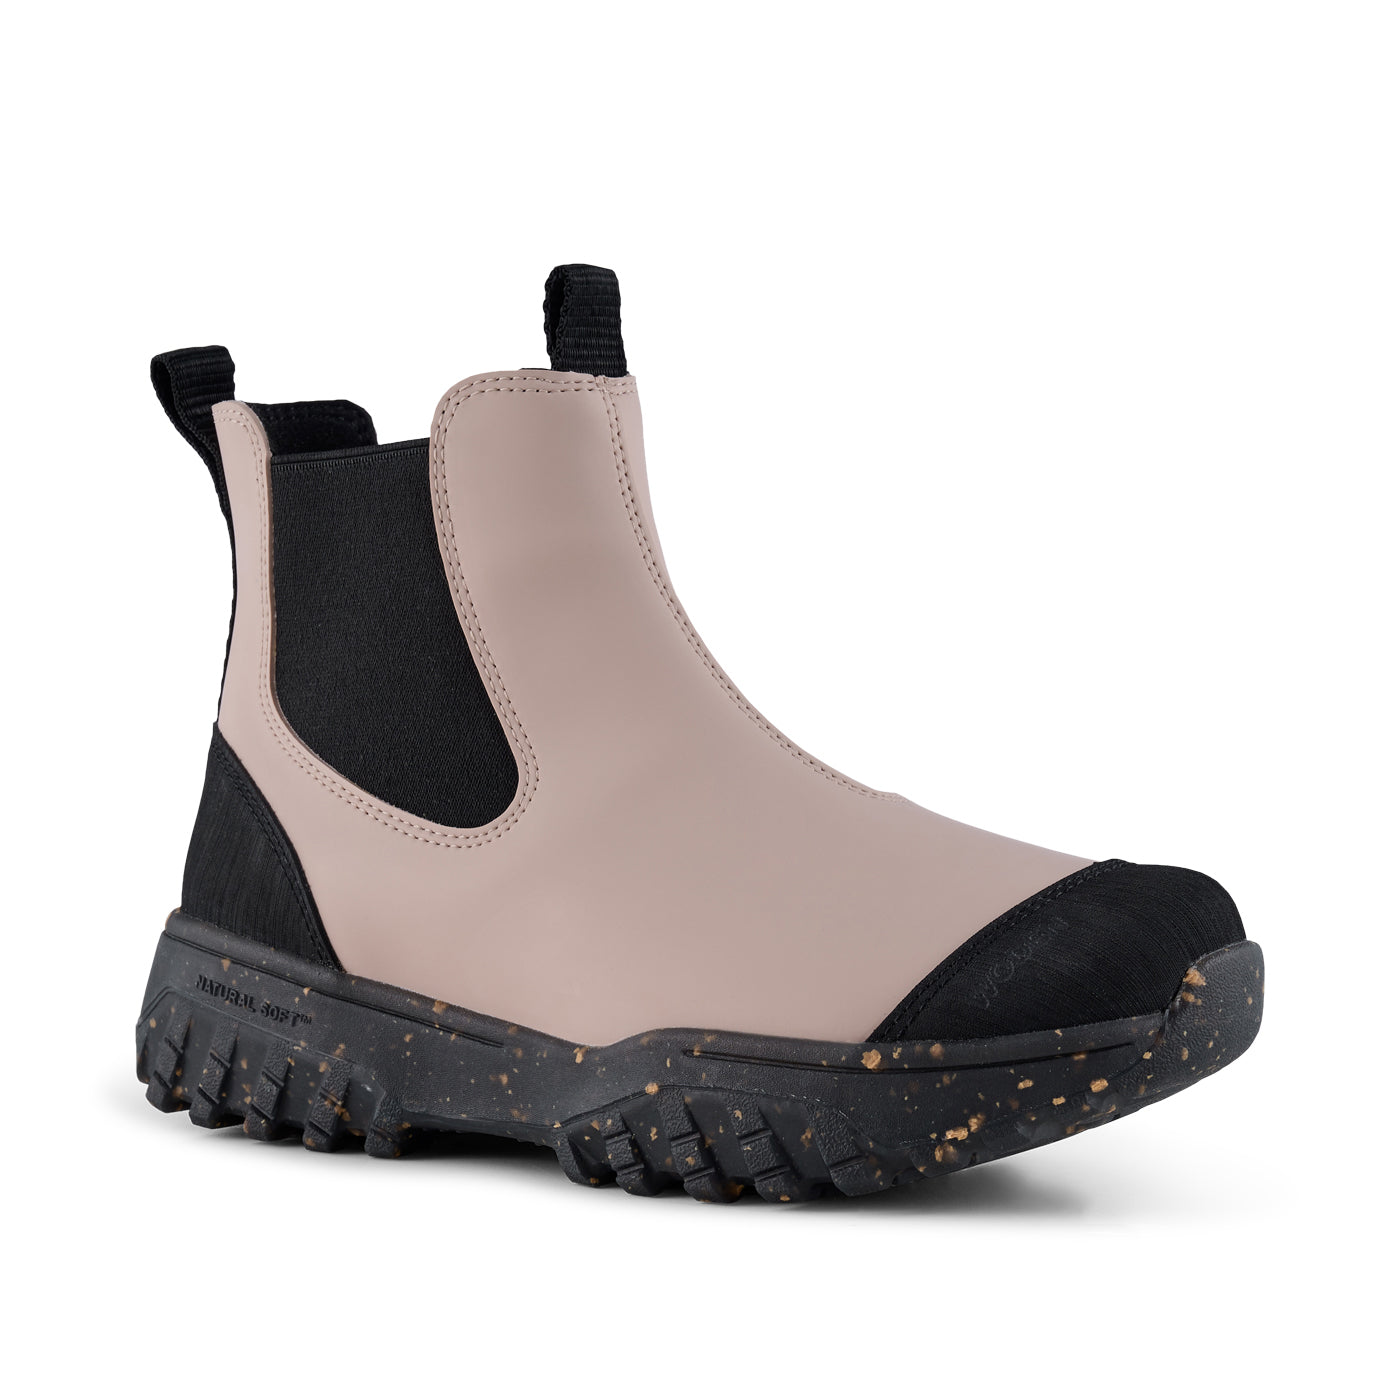 WODEN Magda Track Waterproof Rubber Boots 800 Dry Rose